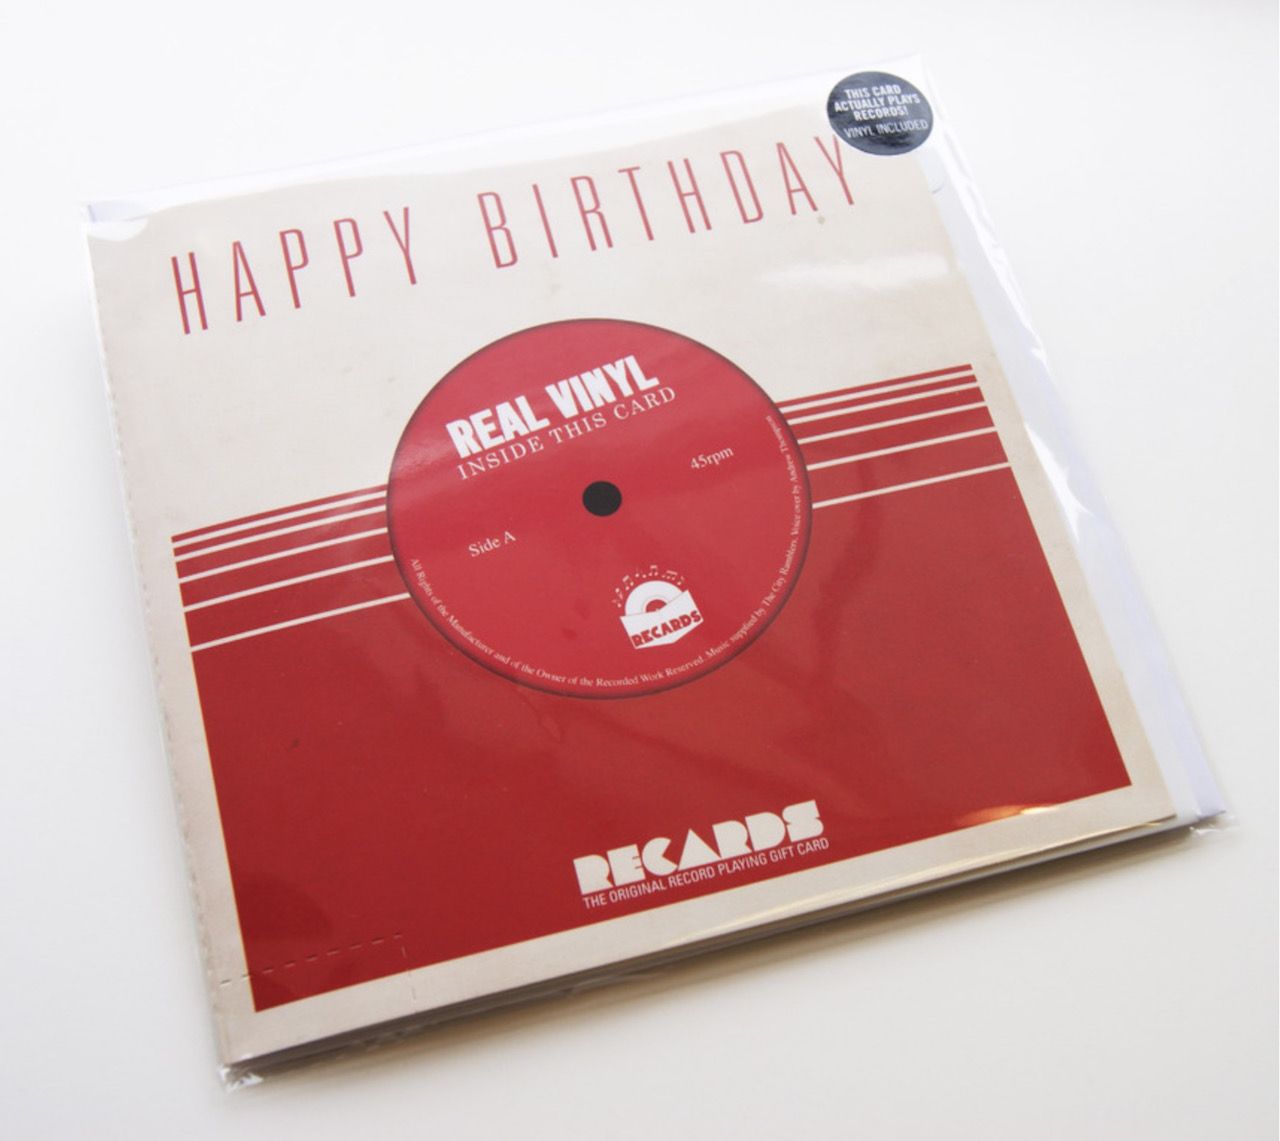 Vinyl Record Player & Birthday Card In One: The Recard : Ask.Audio